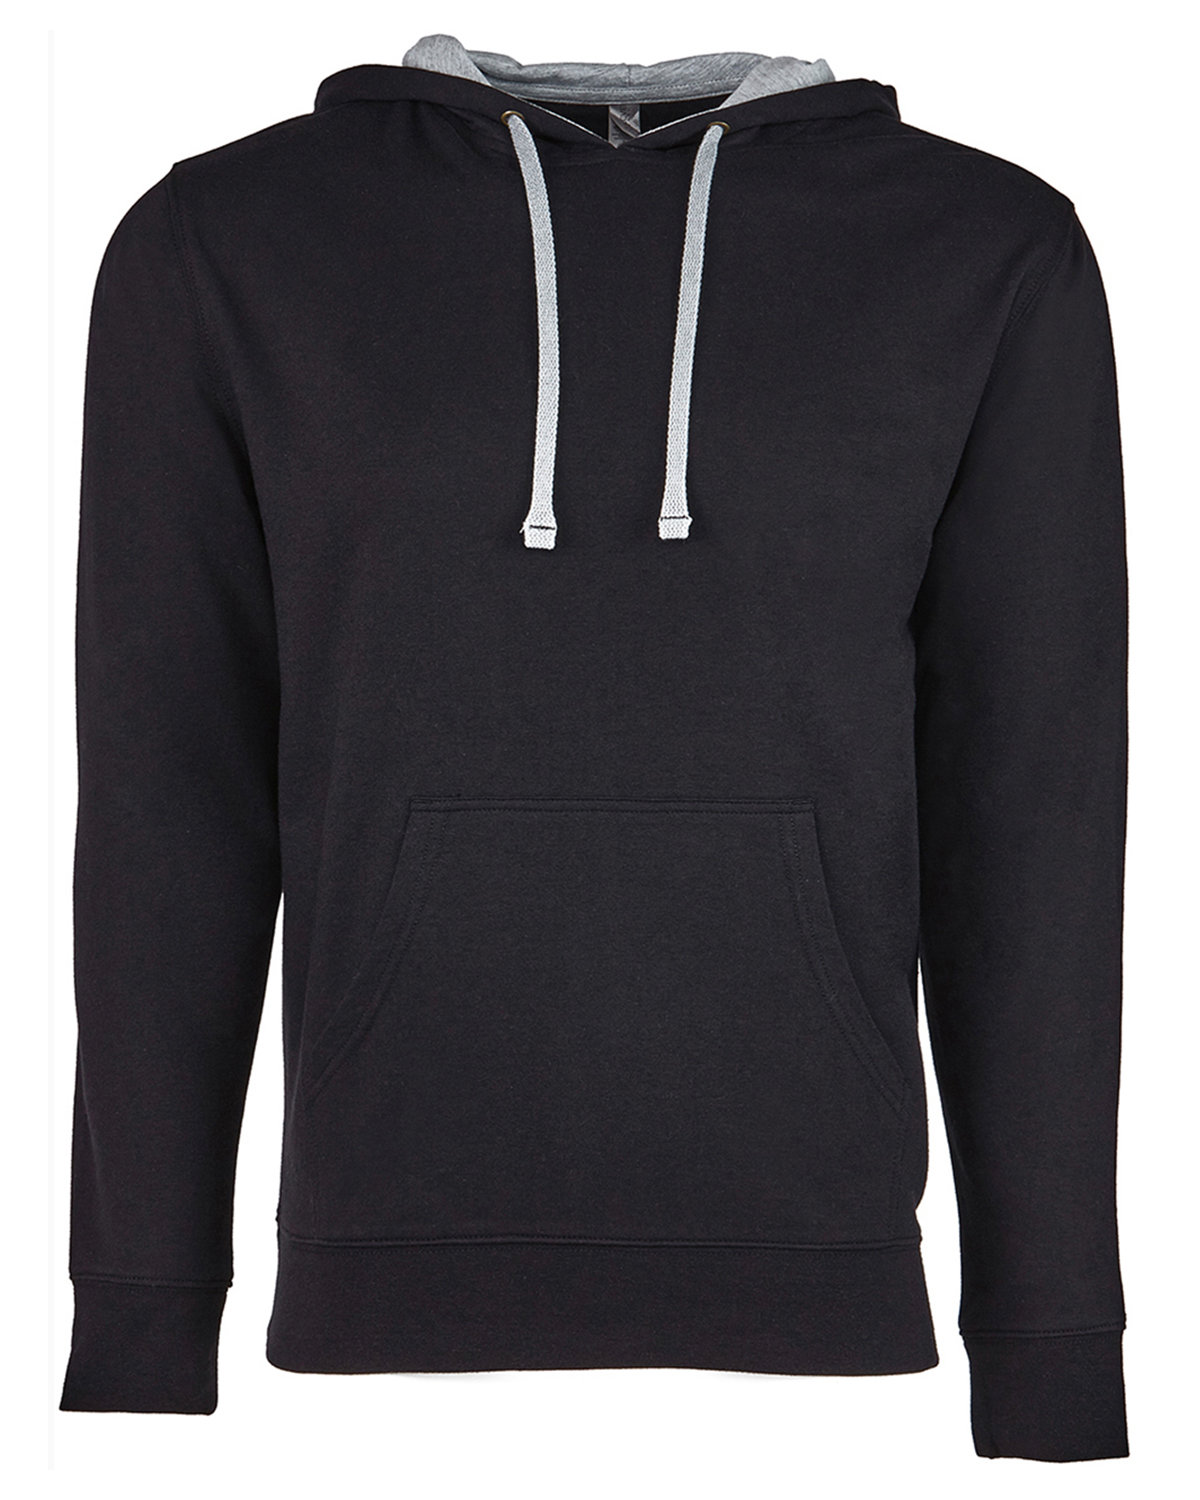 Next Level Apparel Unisex Laguna French Terry Pullover Hooded ...